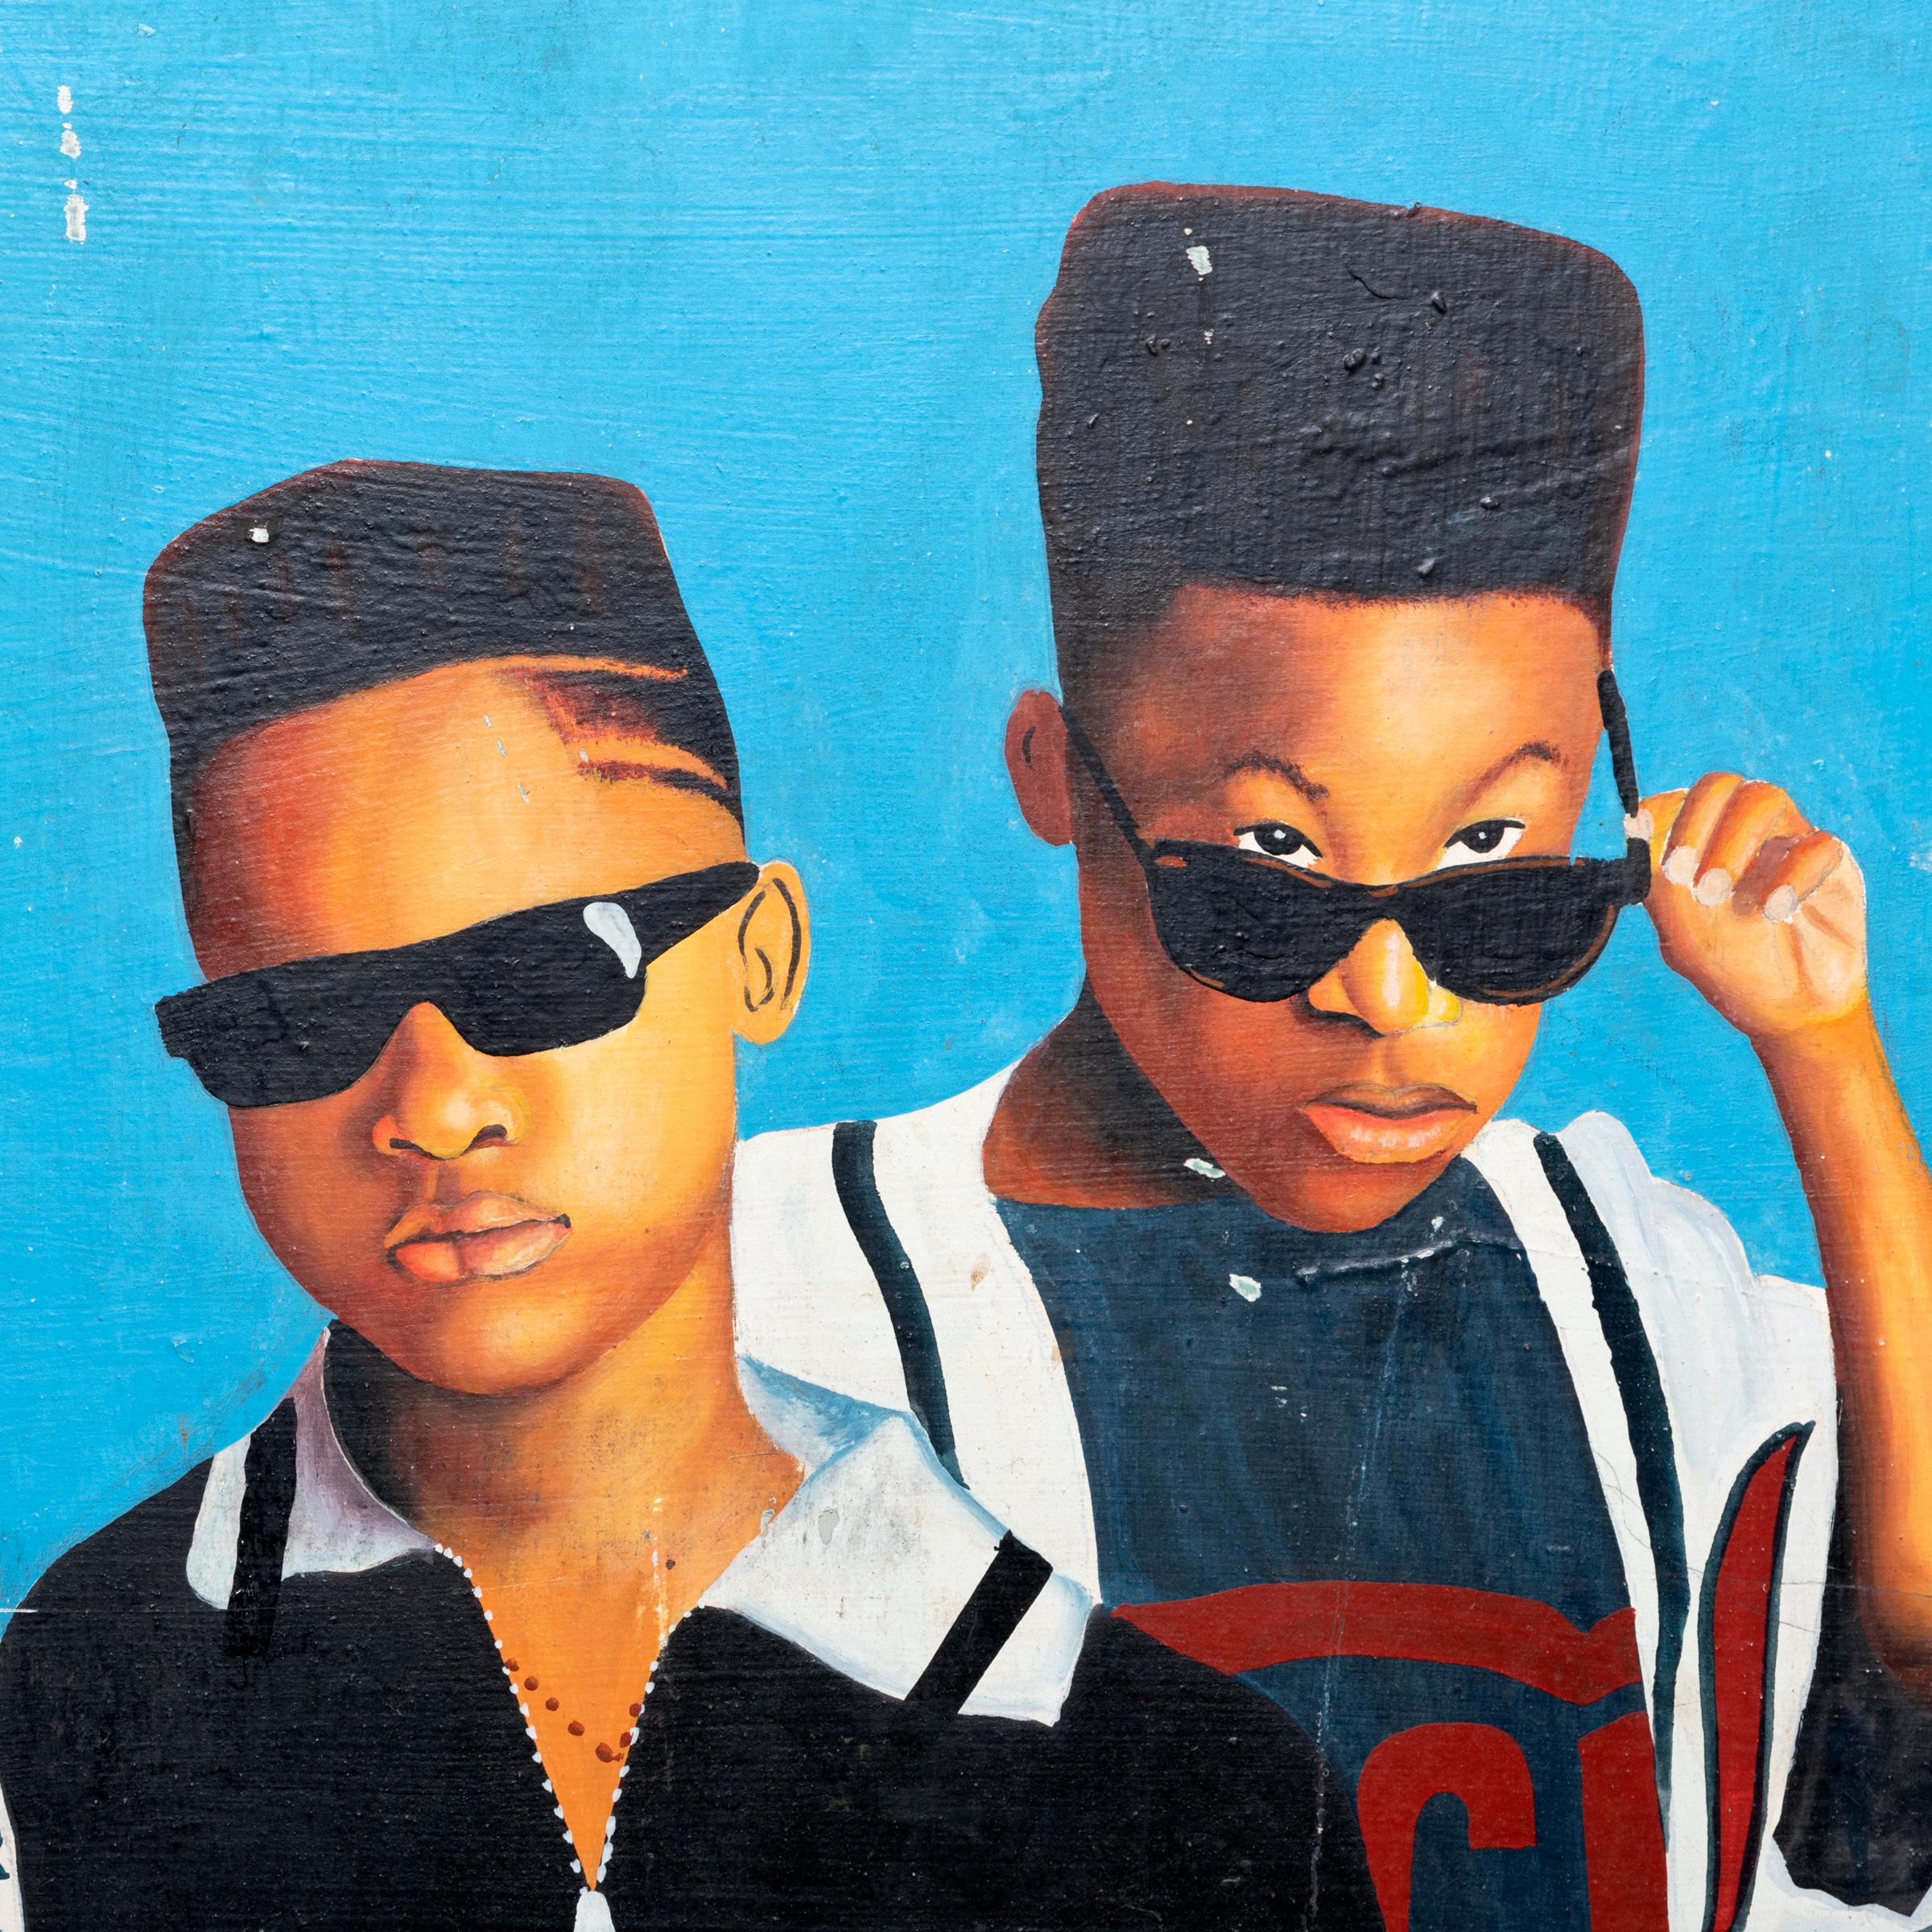 The Boys - Painting by Unknown